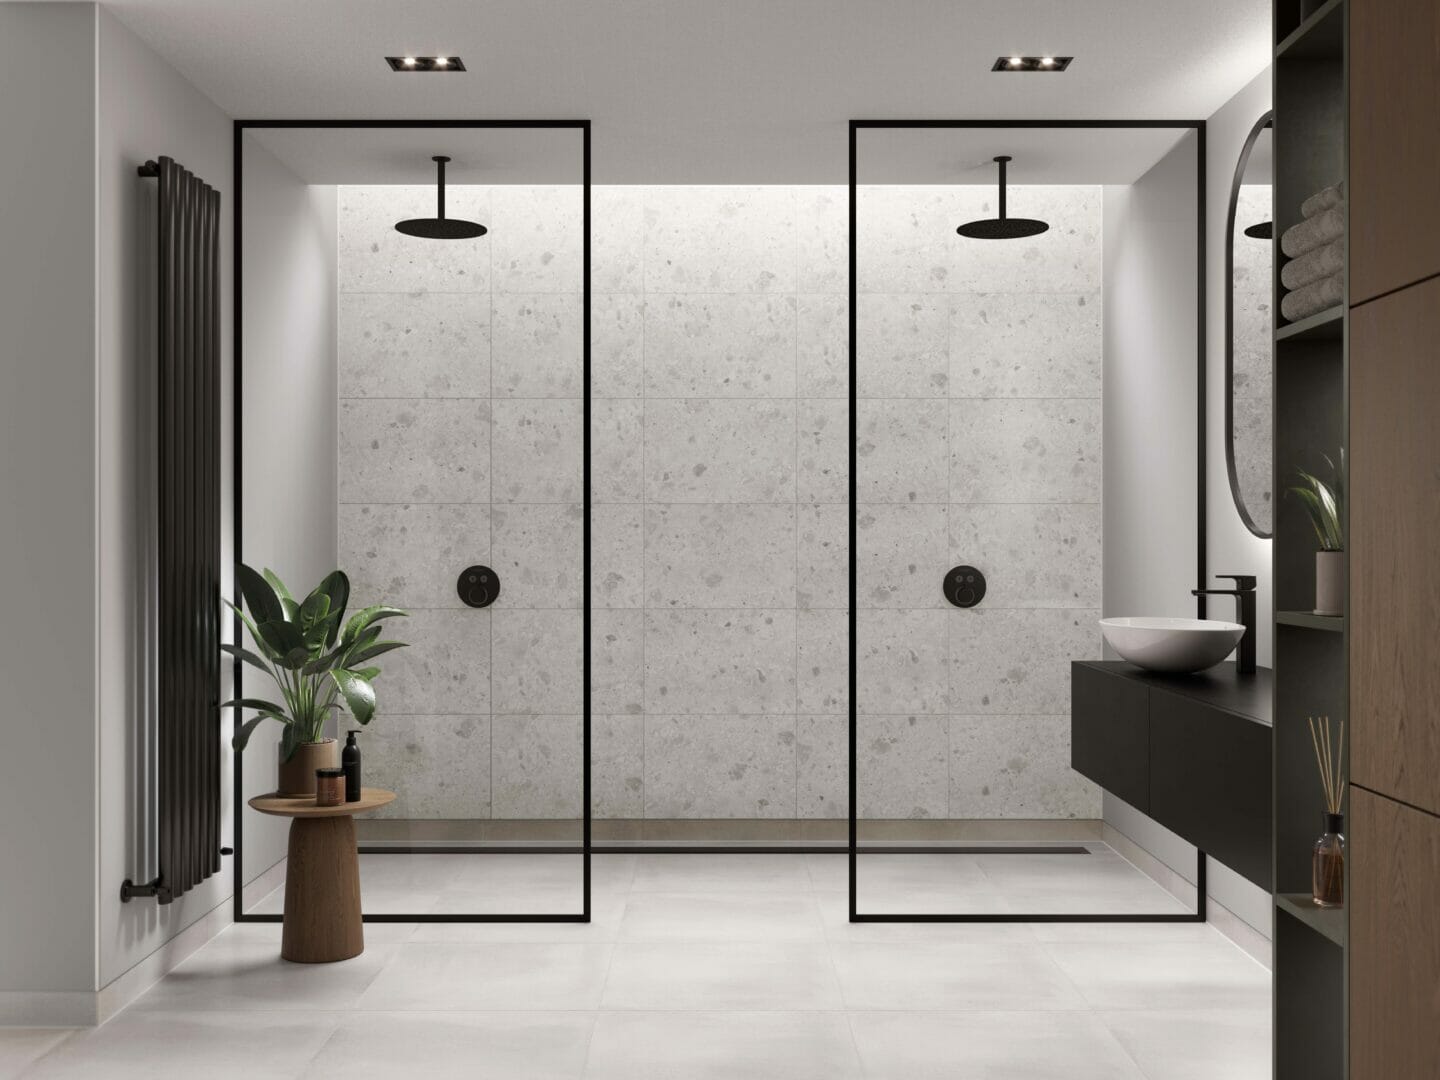 Multipanel launches the first tile-effect wall panel to be manufactured in the UK with its new Tile Collection